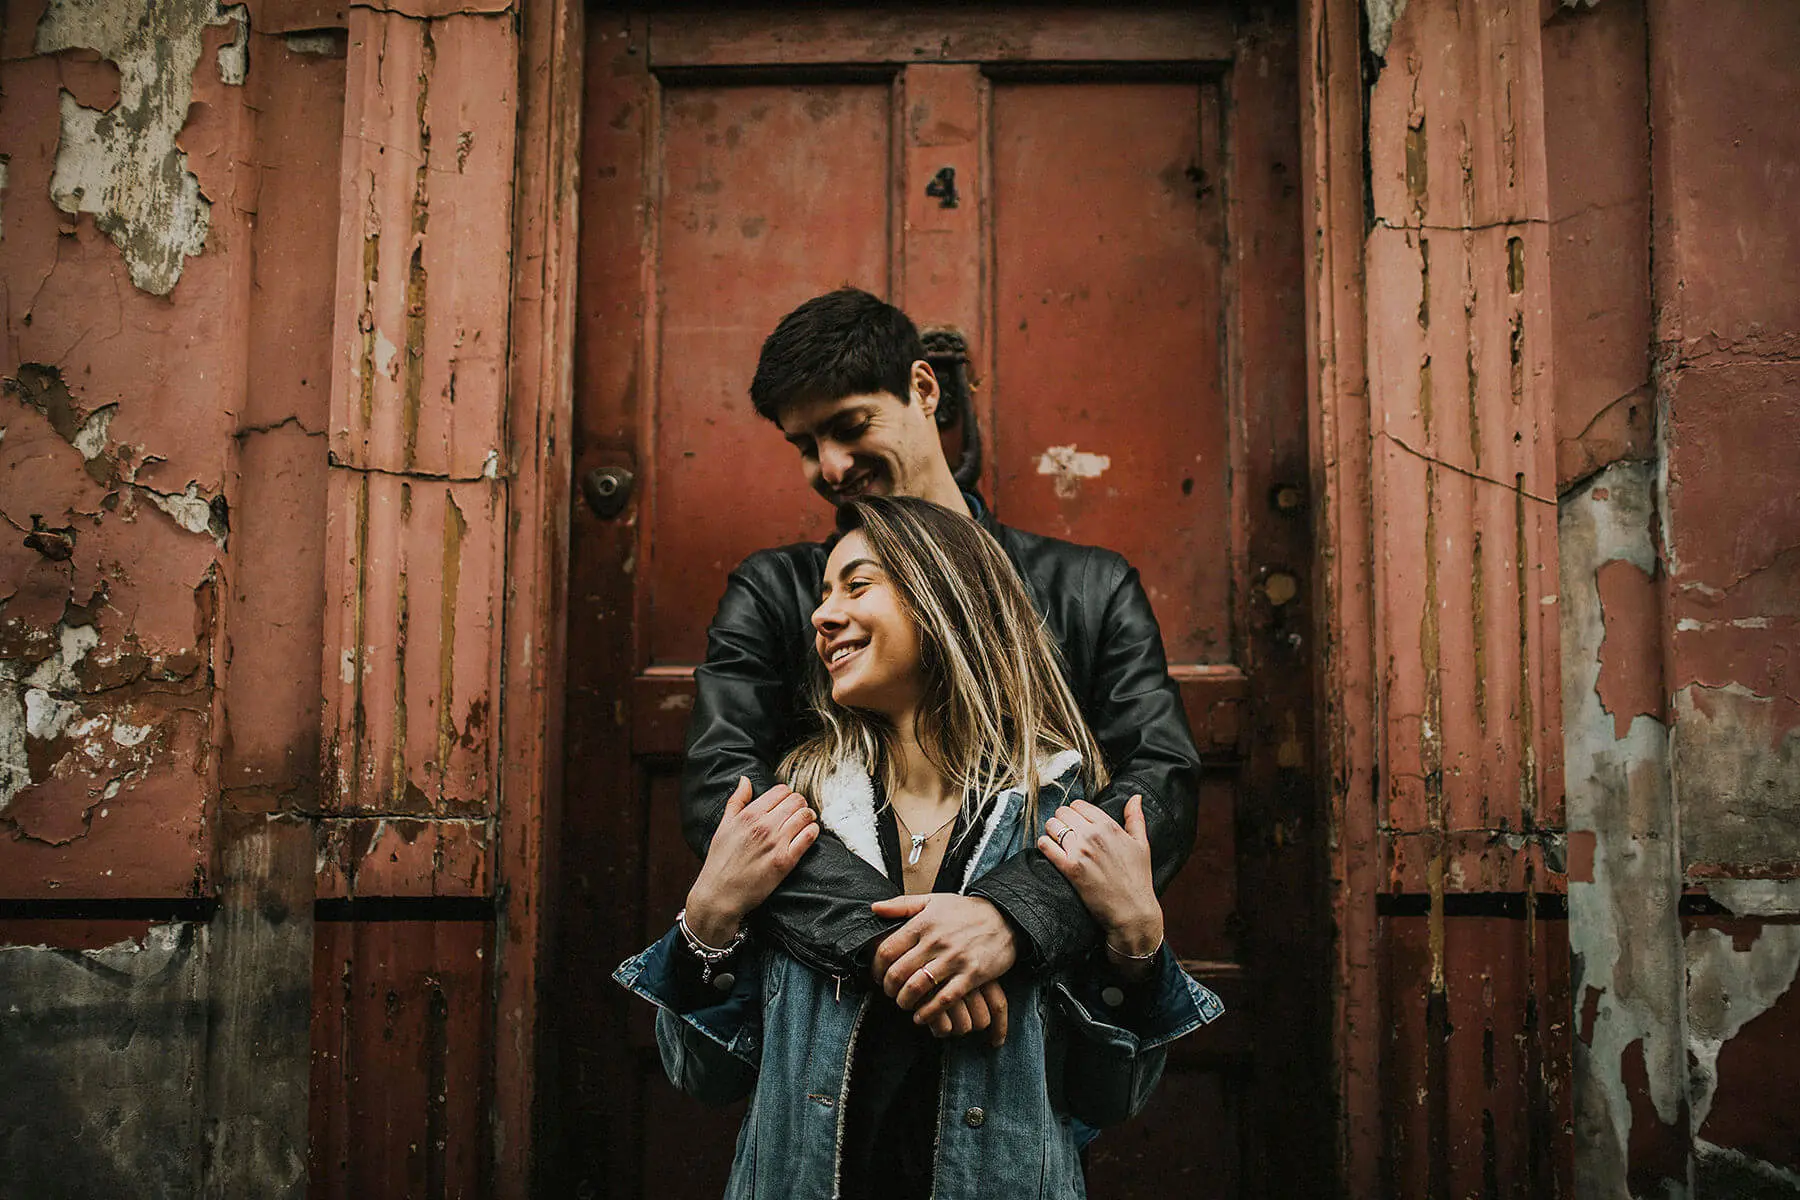 A couple stands in front of a weathered red door with peeling paint, sharing a moment of joy. The woman is in the foreground, laughing and looking to the side, while the man stands behind her, smiling down at her affectionately with his arms wrapped around her shoulders. Both are dressed casually in leather and denim jackets, adding a relaxed vibe to the intimate scene. 